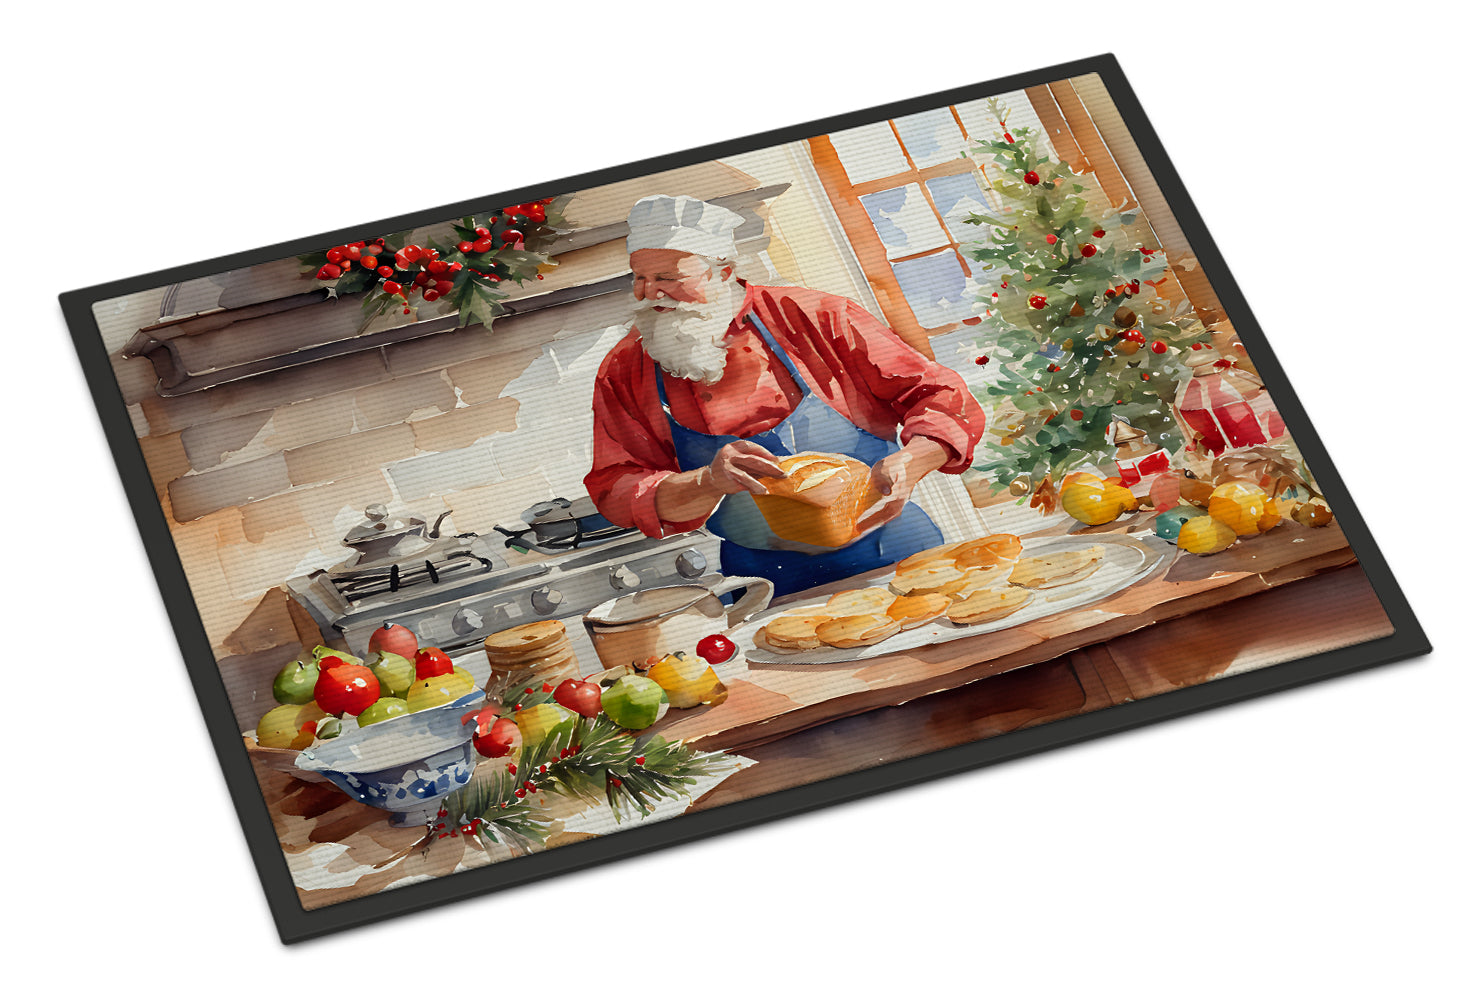 Buy this Cookies with Santa Claus Weihnachtsmann Doormat